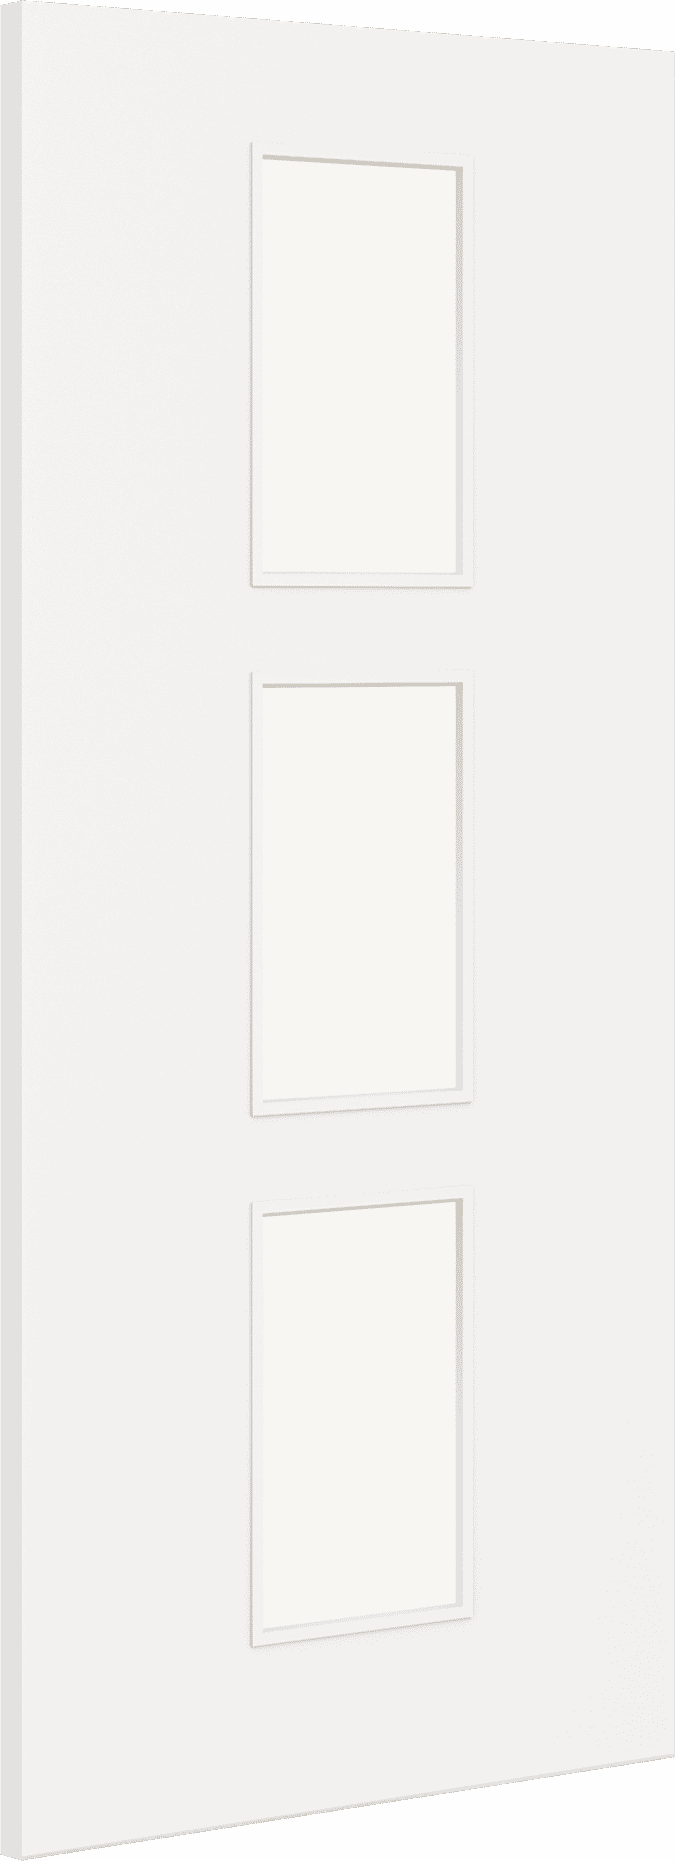 2040mm x 826mm x 44mm Architectural Paint Grade White 11 Frosted Glazed Fire Door Blank